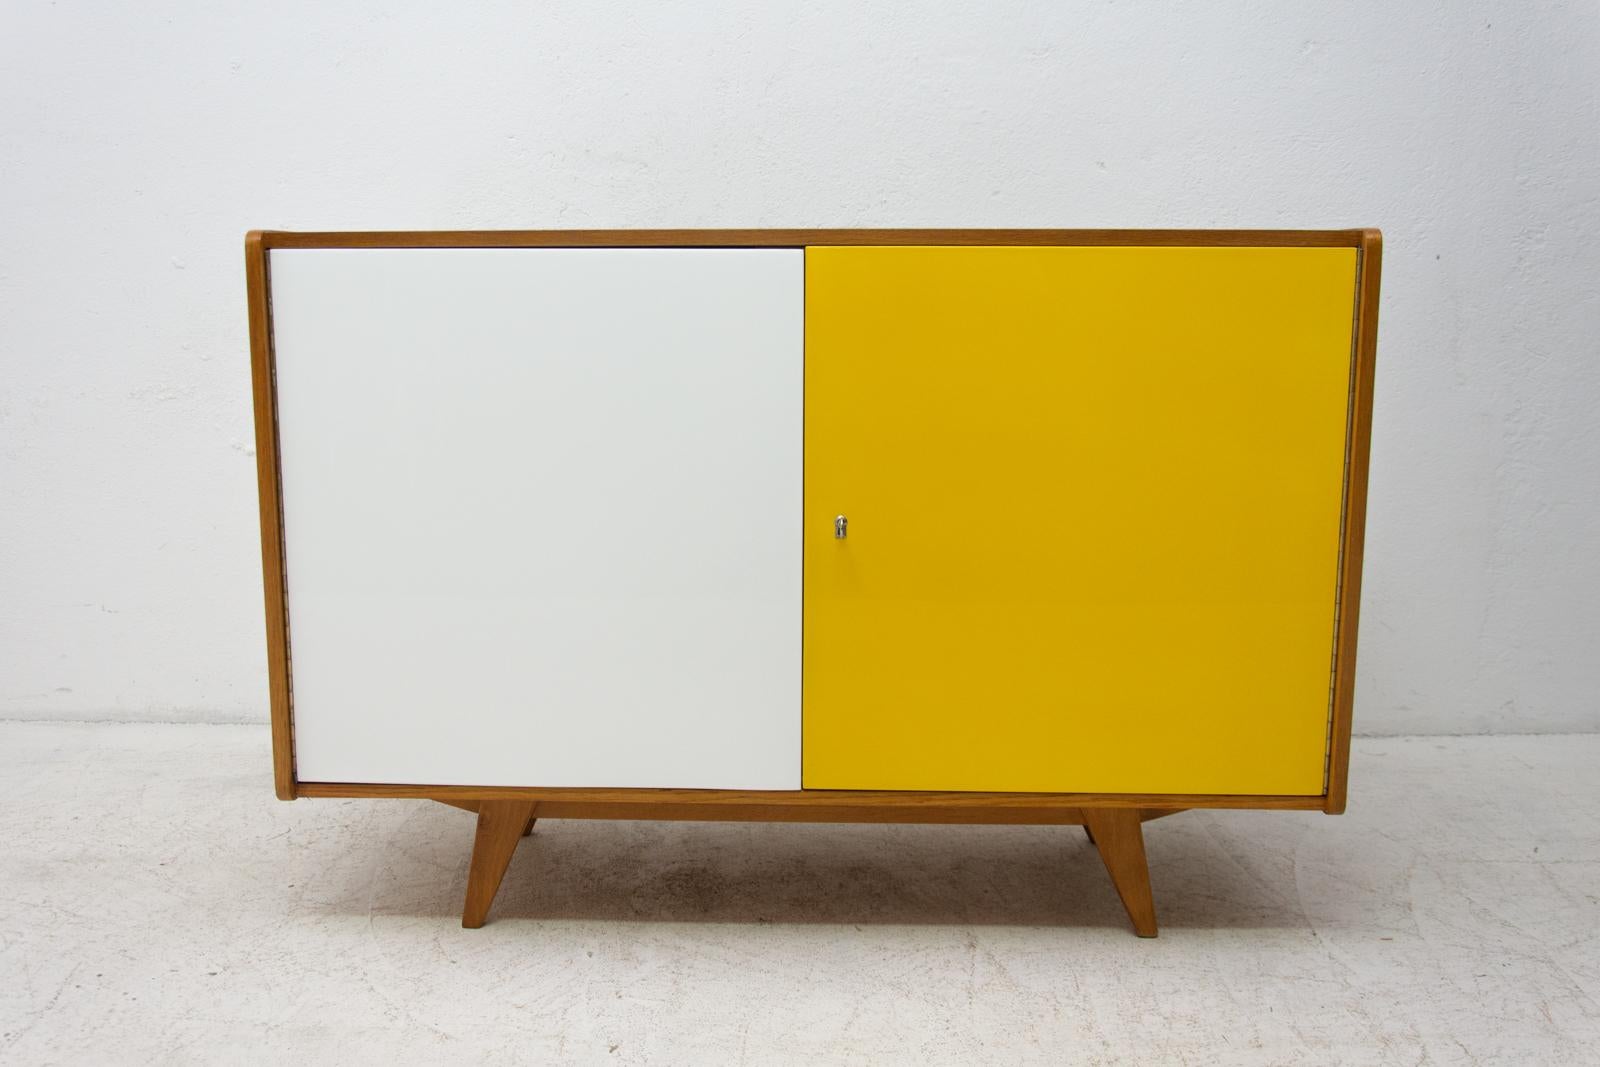 Midcentury sideboard-cabinet, catalogue no. U-450, designed by Jiri Jiroutek. It´s made of beechwood, veneer, plywood and laminate. In excellent condition, fully refurbished.

The cabinet comes from the famous Universal series (U-450), which was